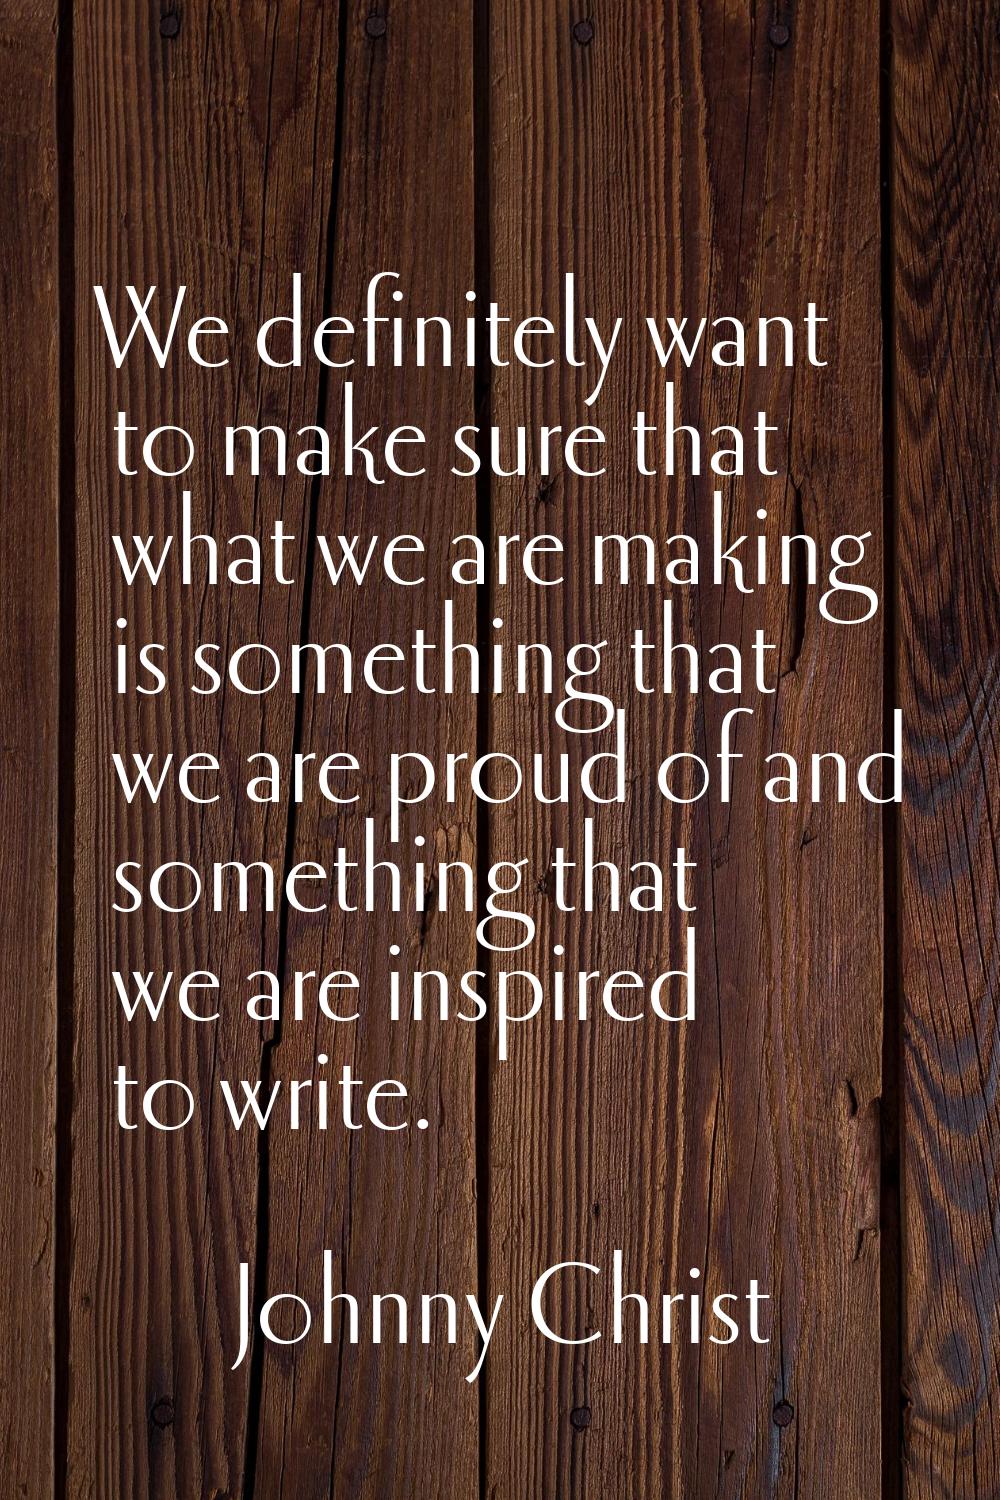 We definitely want to make sure that what we are making is something that we are proud of and somet